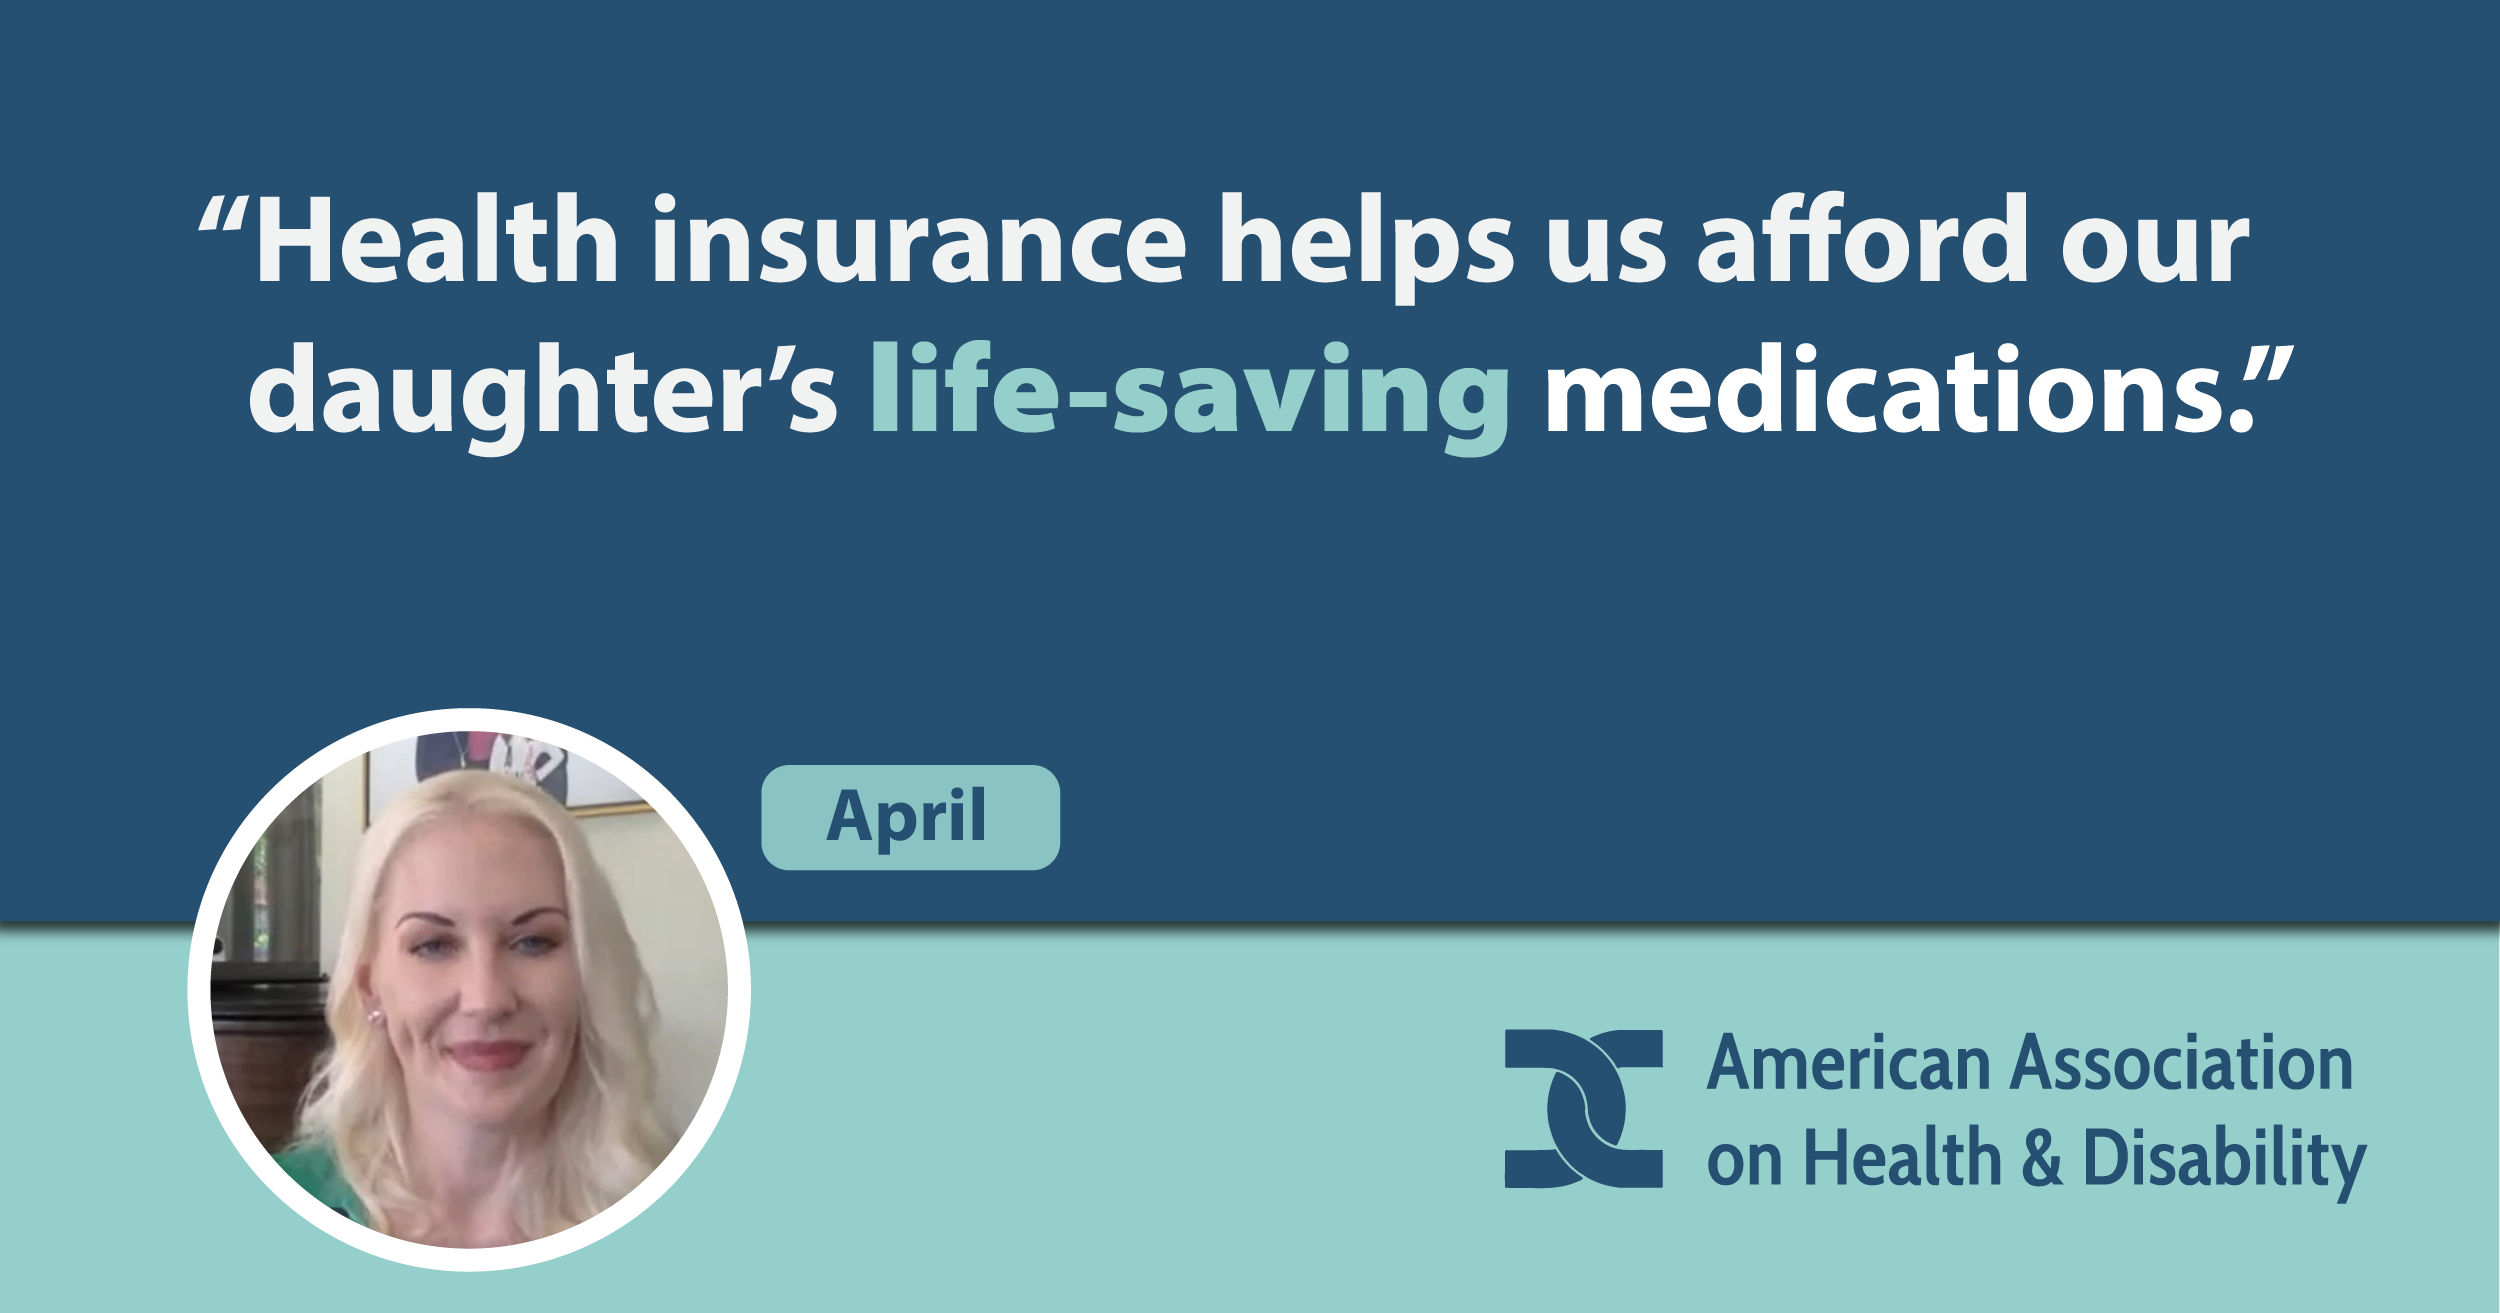 Graphic which includes a photo of a woman named April with a quote “Health insurance helps us afford our daughter’s life-saving medications.”